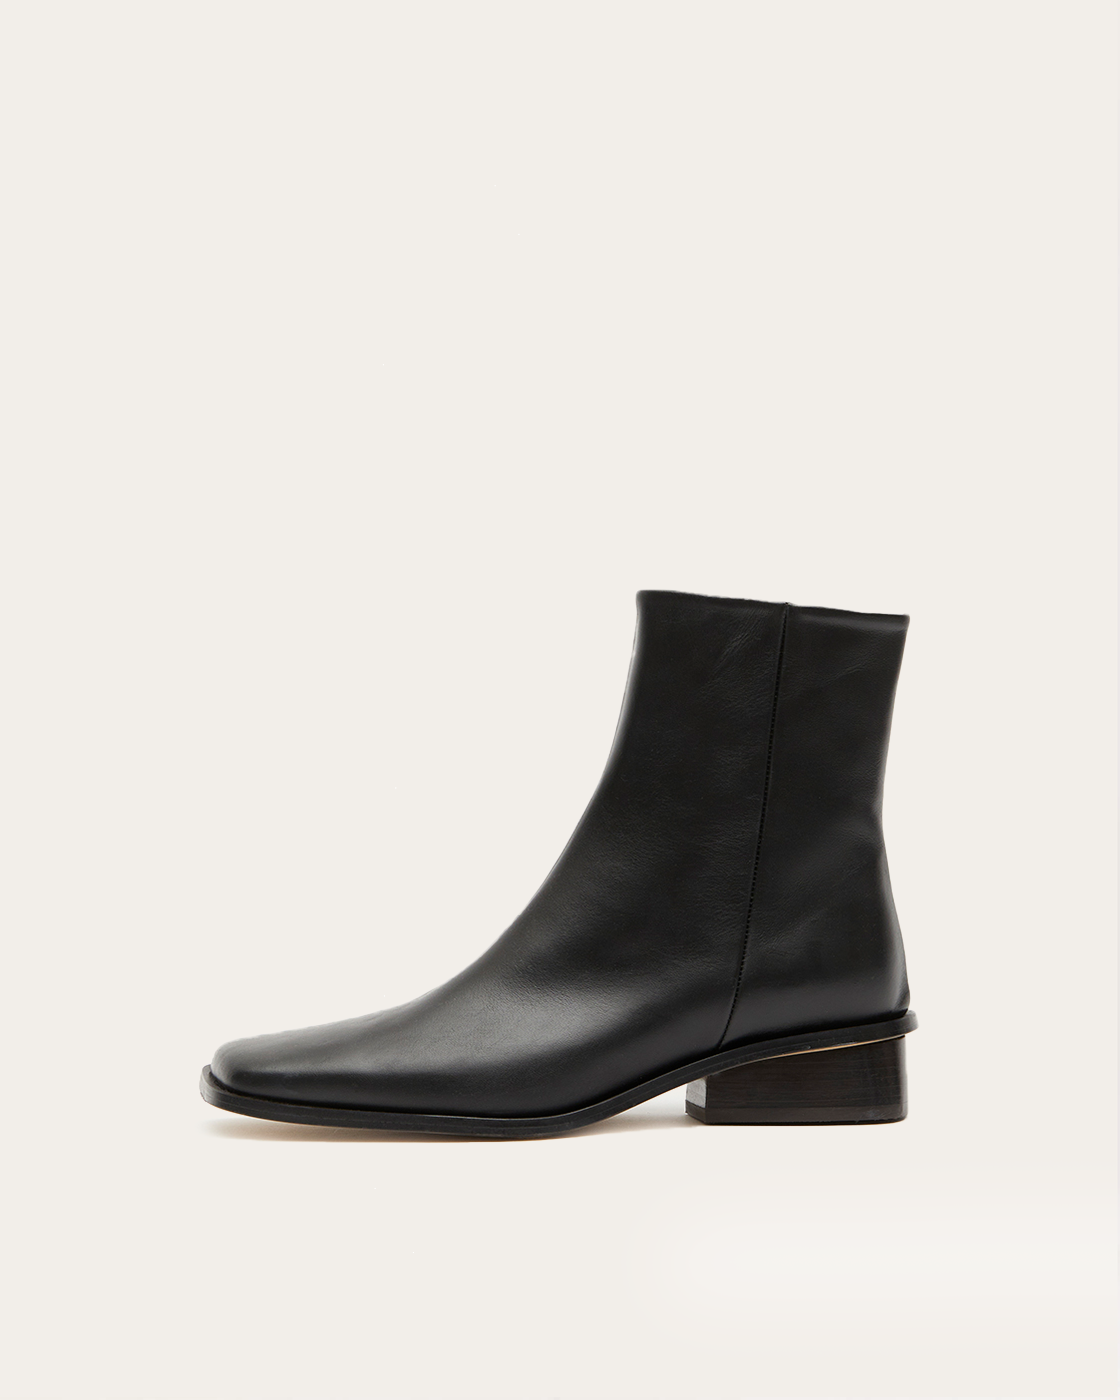 Rise Ankle Boot 30mm Leather Black